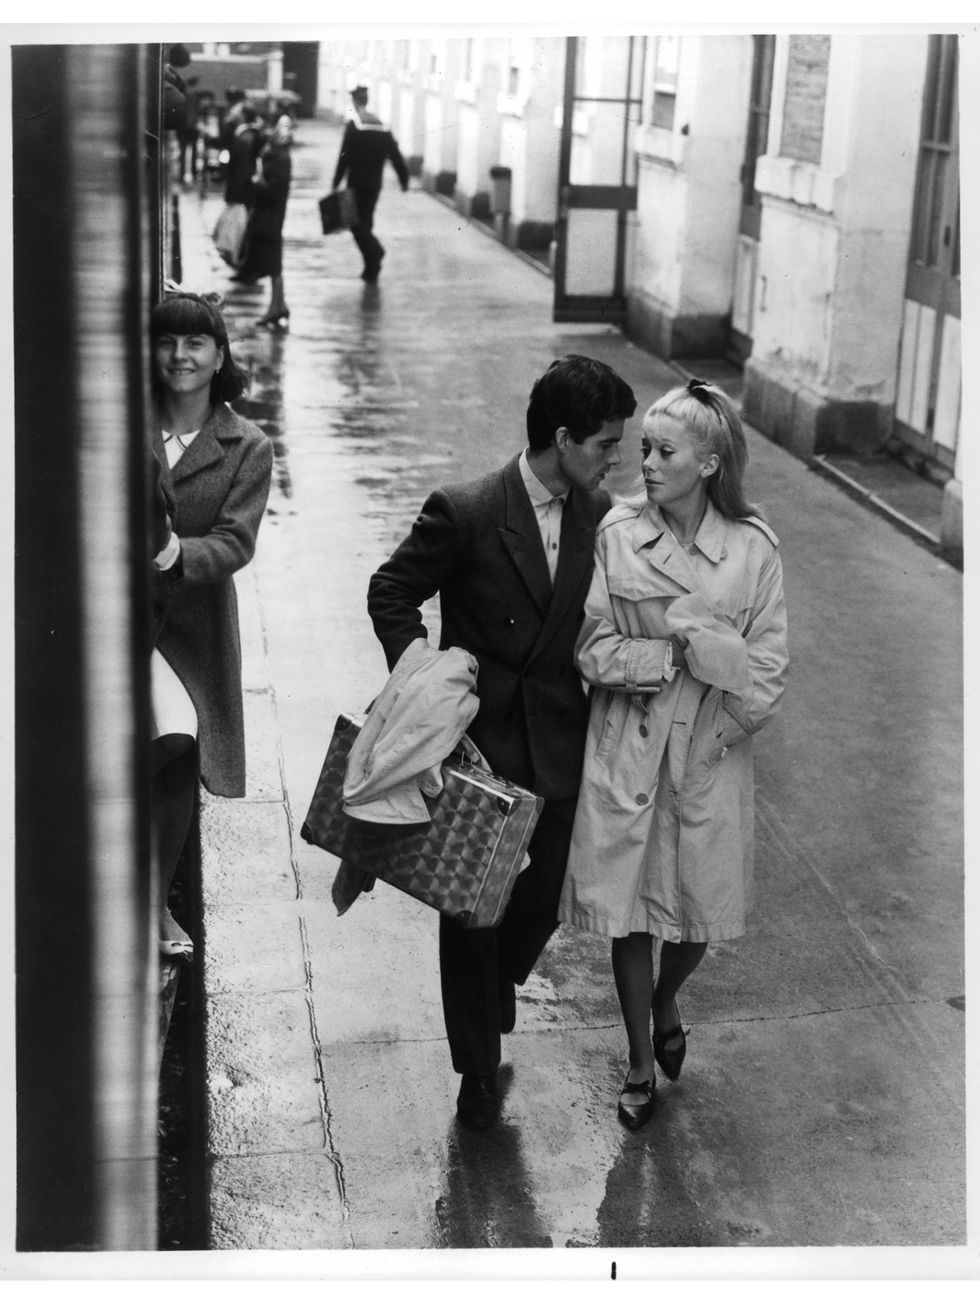 nino castelnuovo and catherine deneuve walk down a wet sidewalk in a scene from the film 'the umbrellas of cherbourg', 1964 photo by landau releasing organizationgetty images